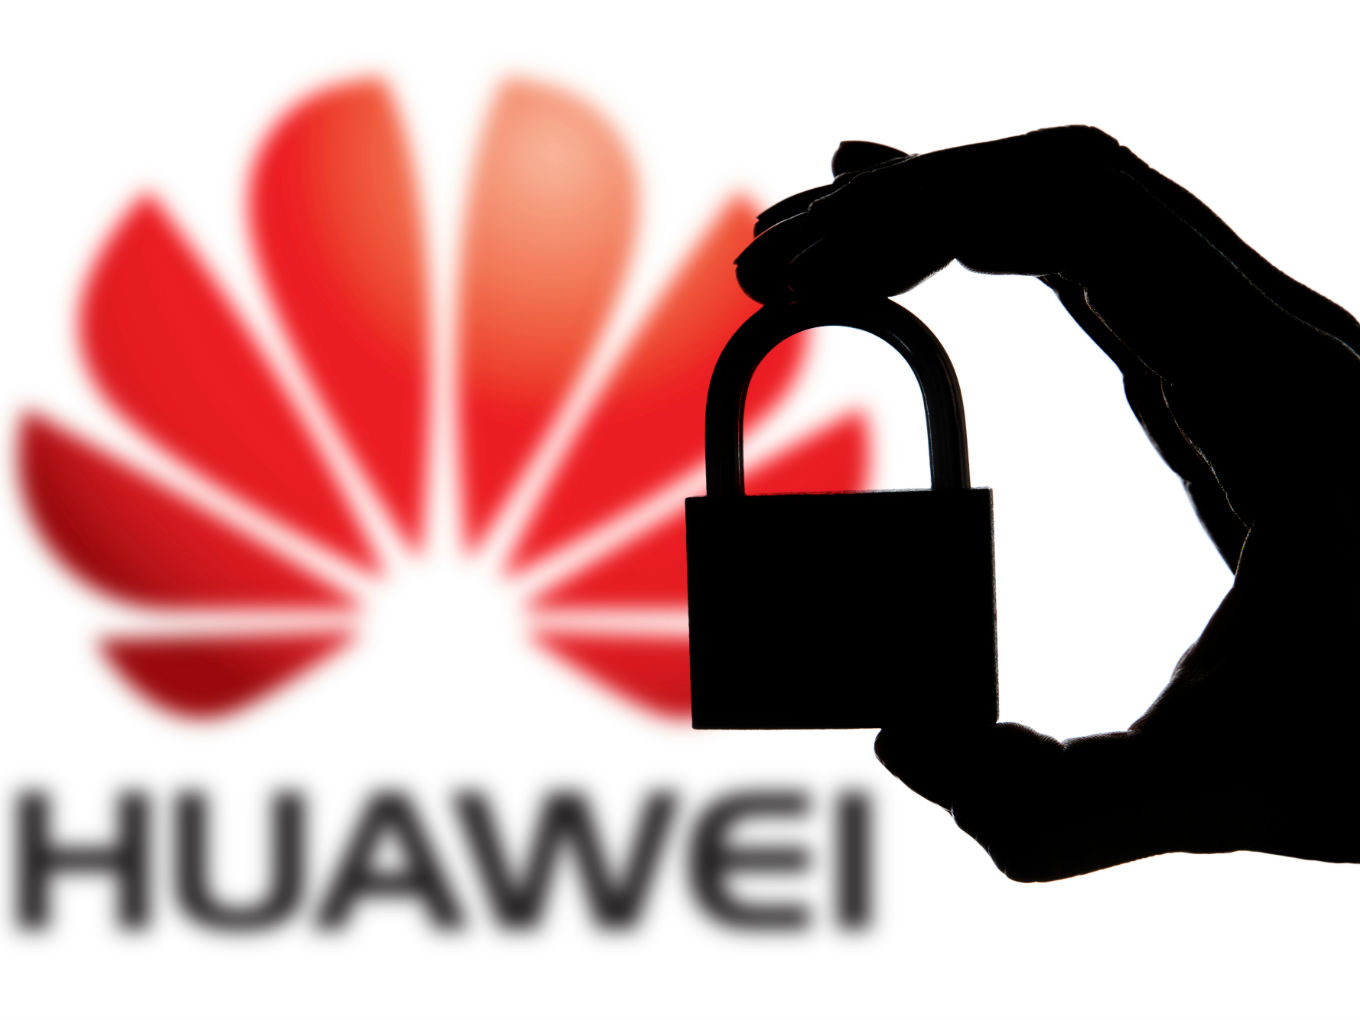 Huawei Questions Govt, If Not Allowed For 5G Spectrum, Why Manufacture In India?